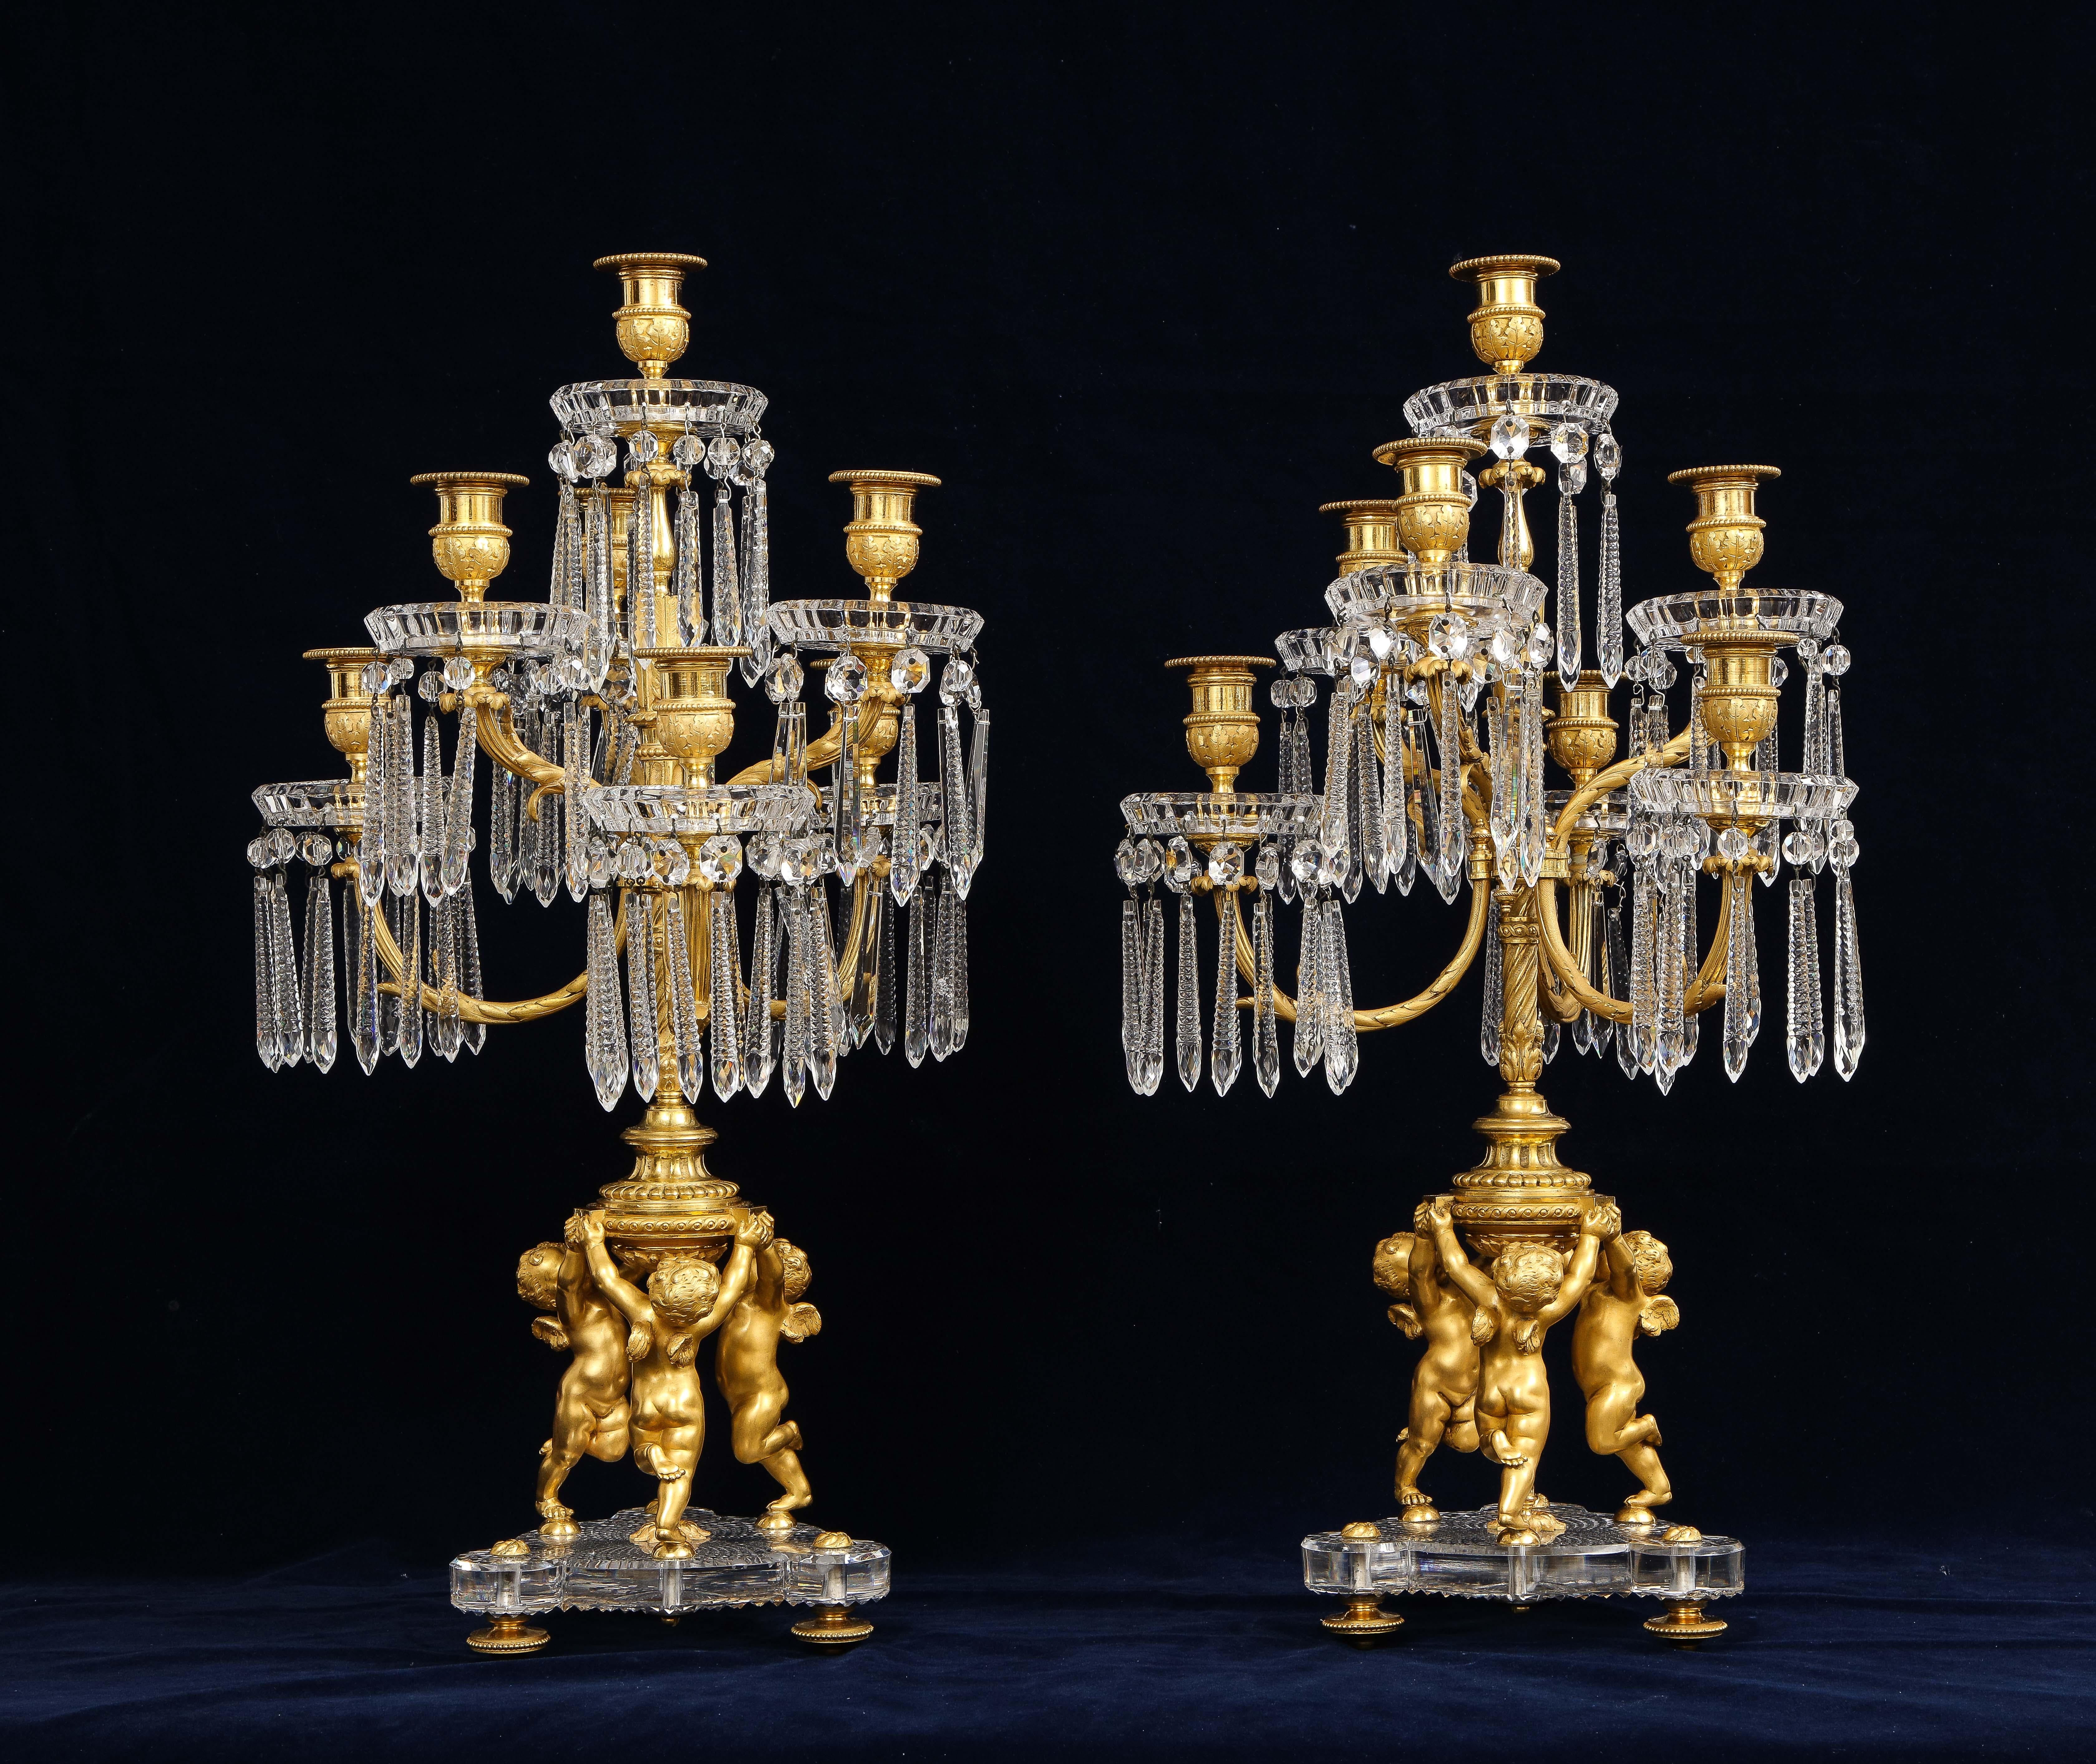 Louis XVI Pair 19th Century French 7 Arm Dore Bronze & Crystal Candelabras Signed Baccarat